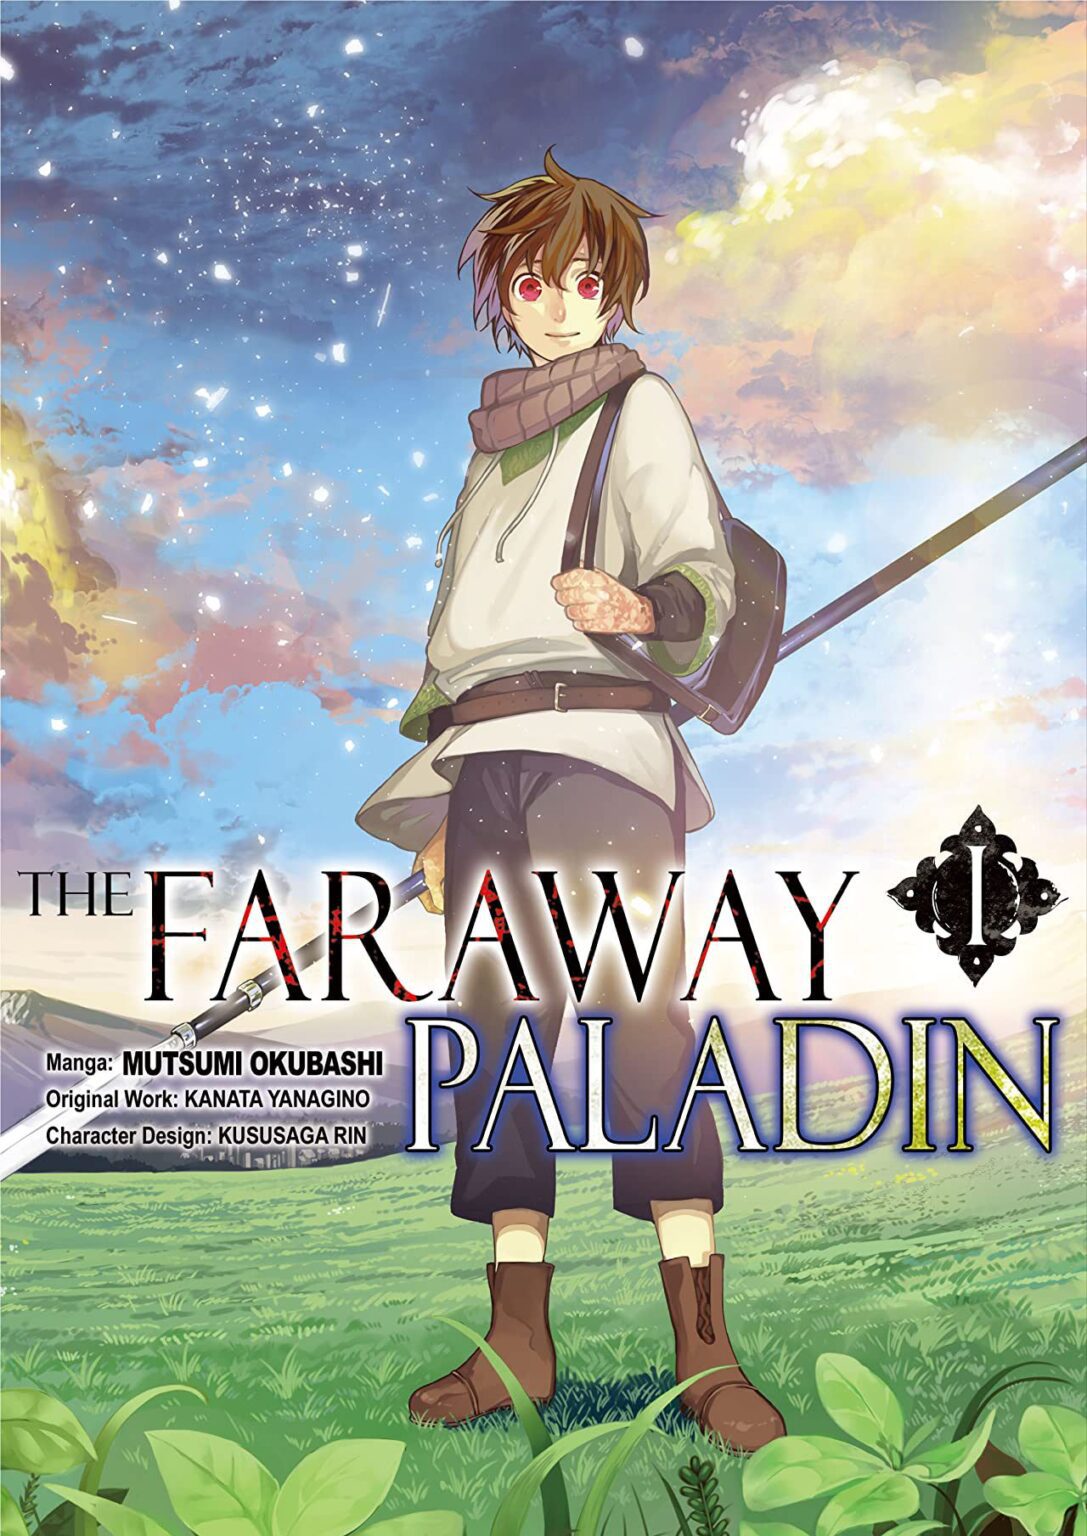 The Faraway Paladin: Trailer and poster for the anime, inspired by the work of Kanata Yanagino